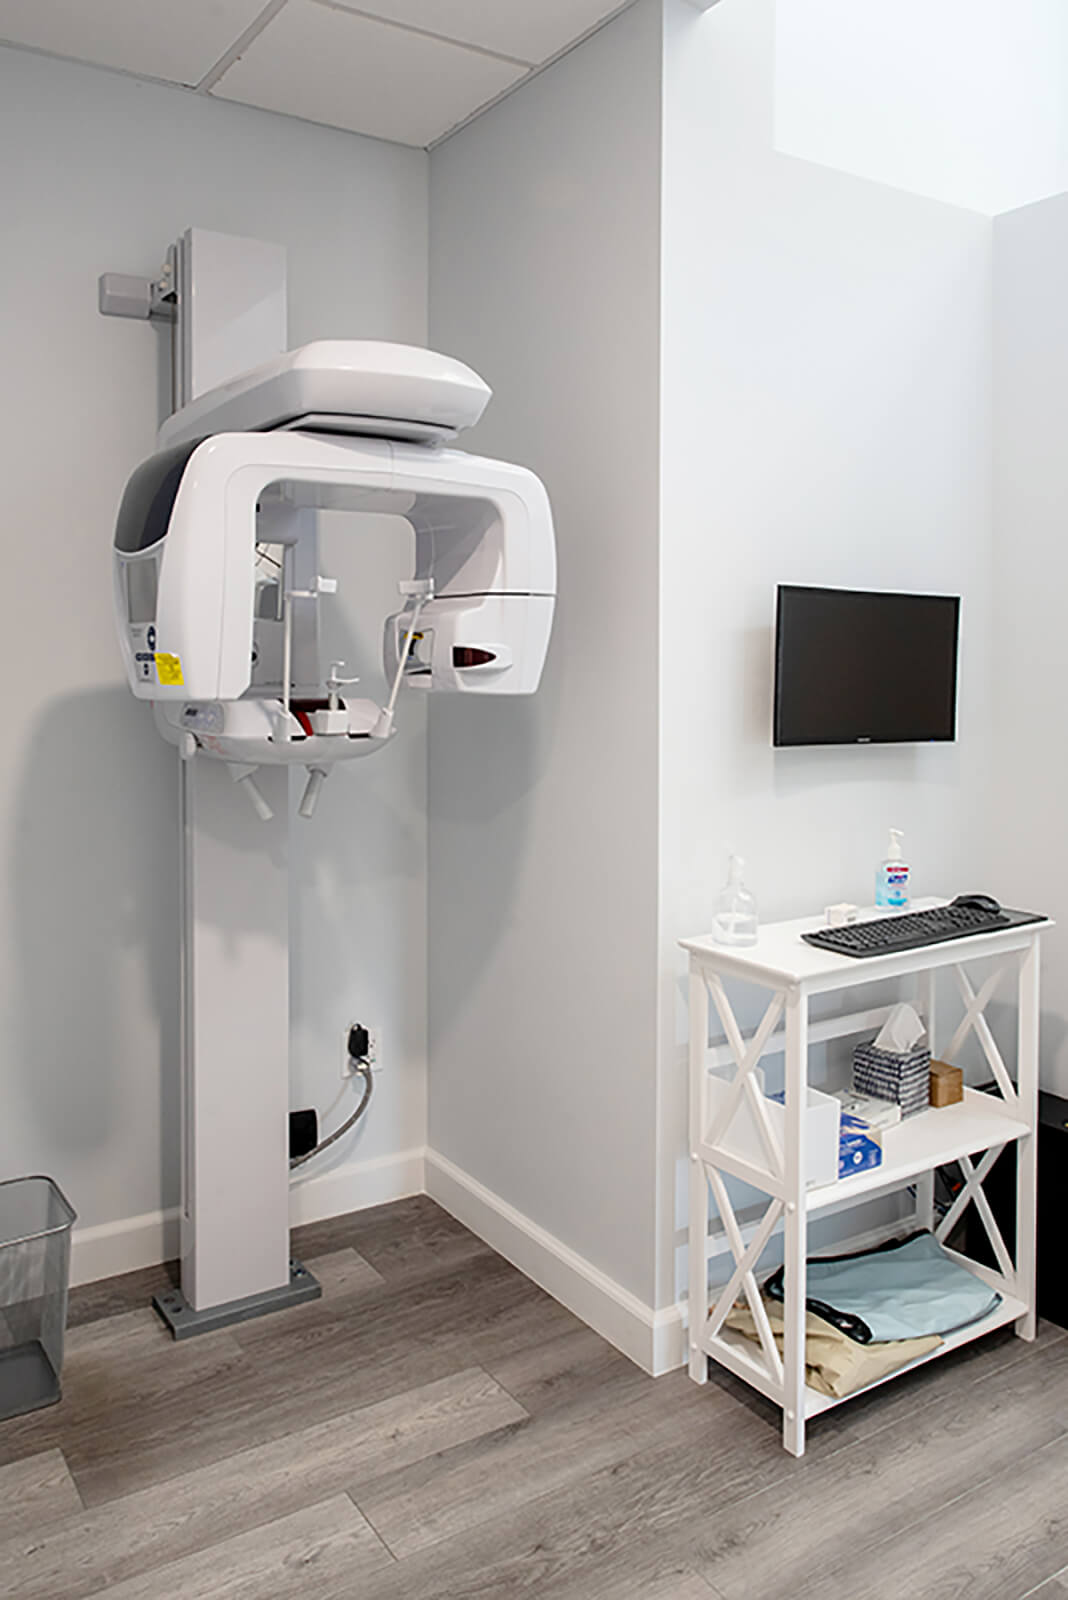 Scarsdale Endodontist State of the Art full mouth XRay imaging